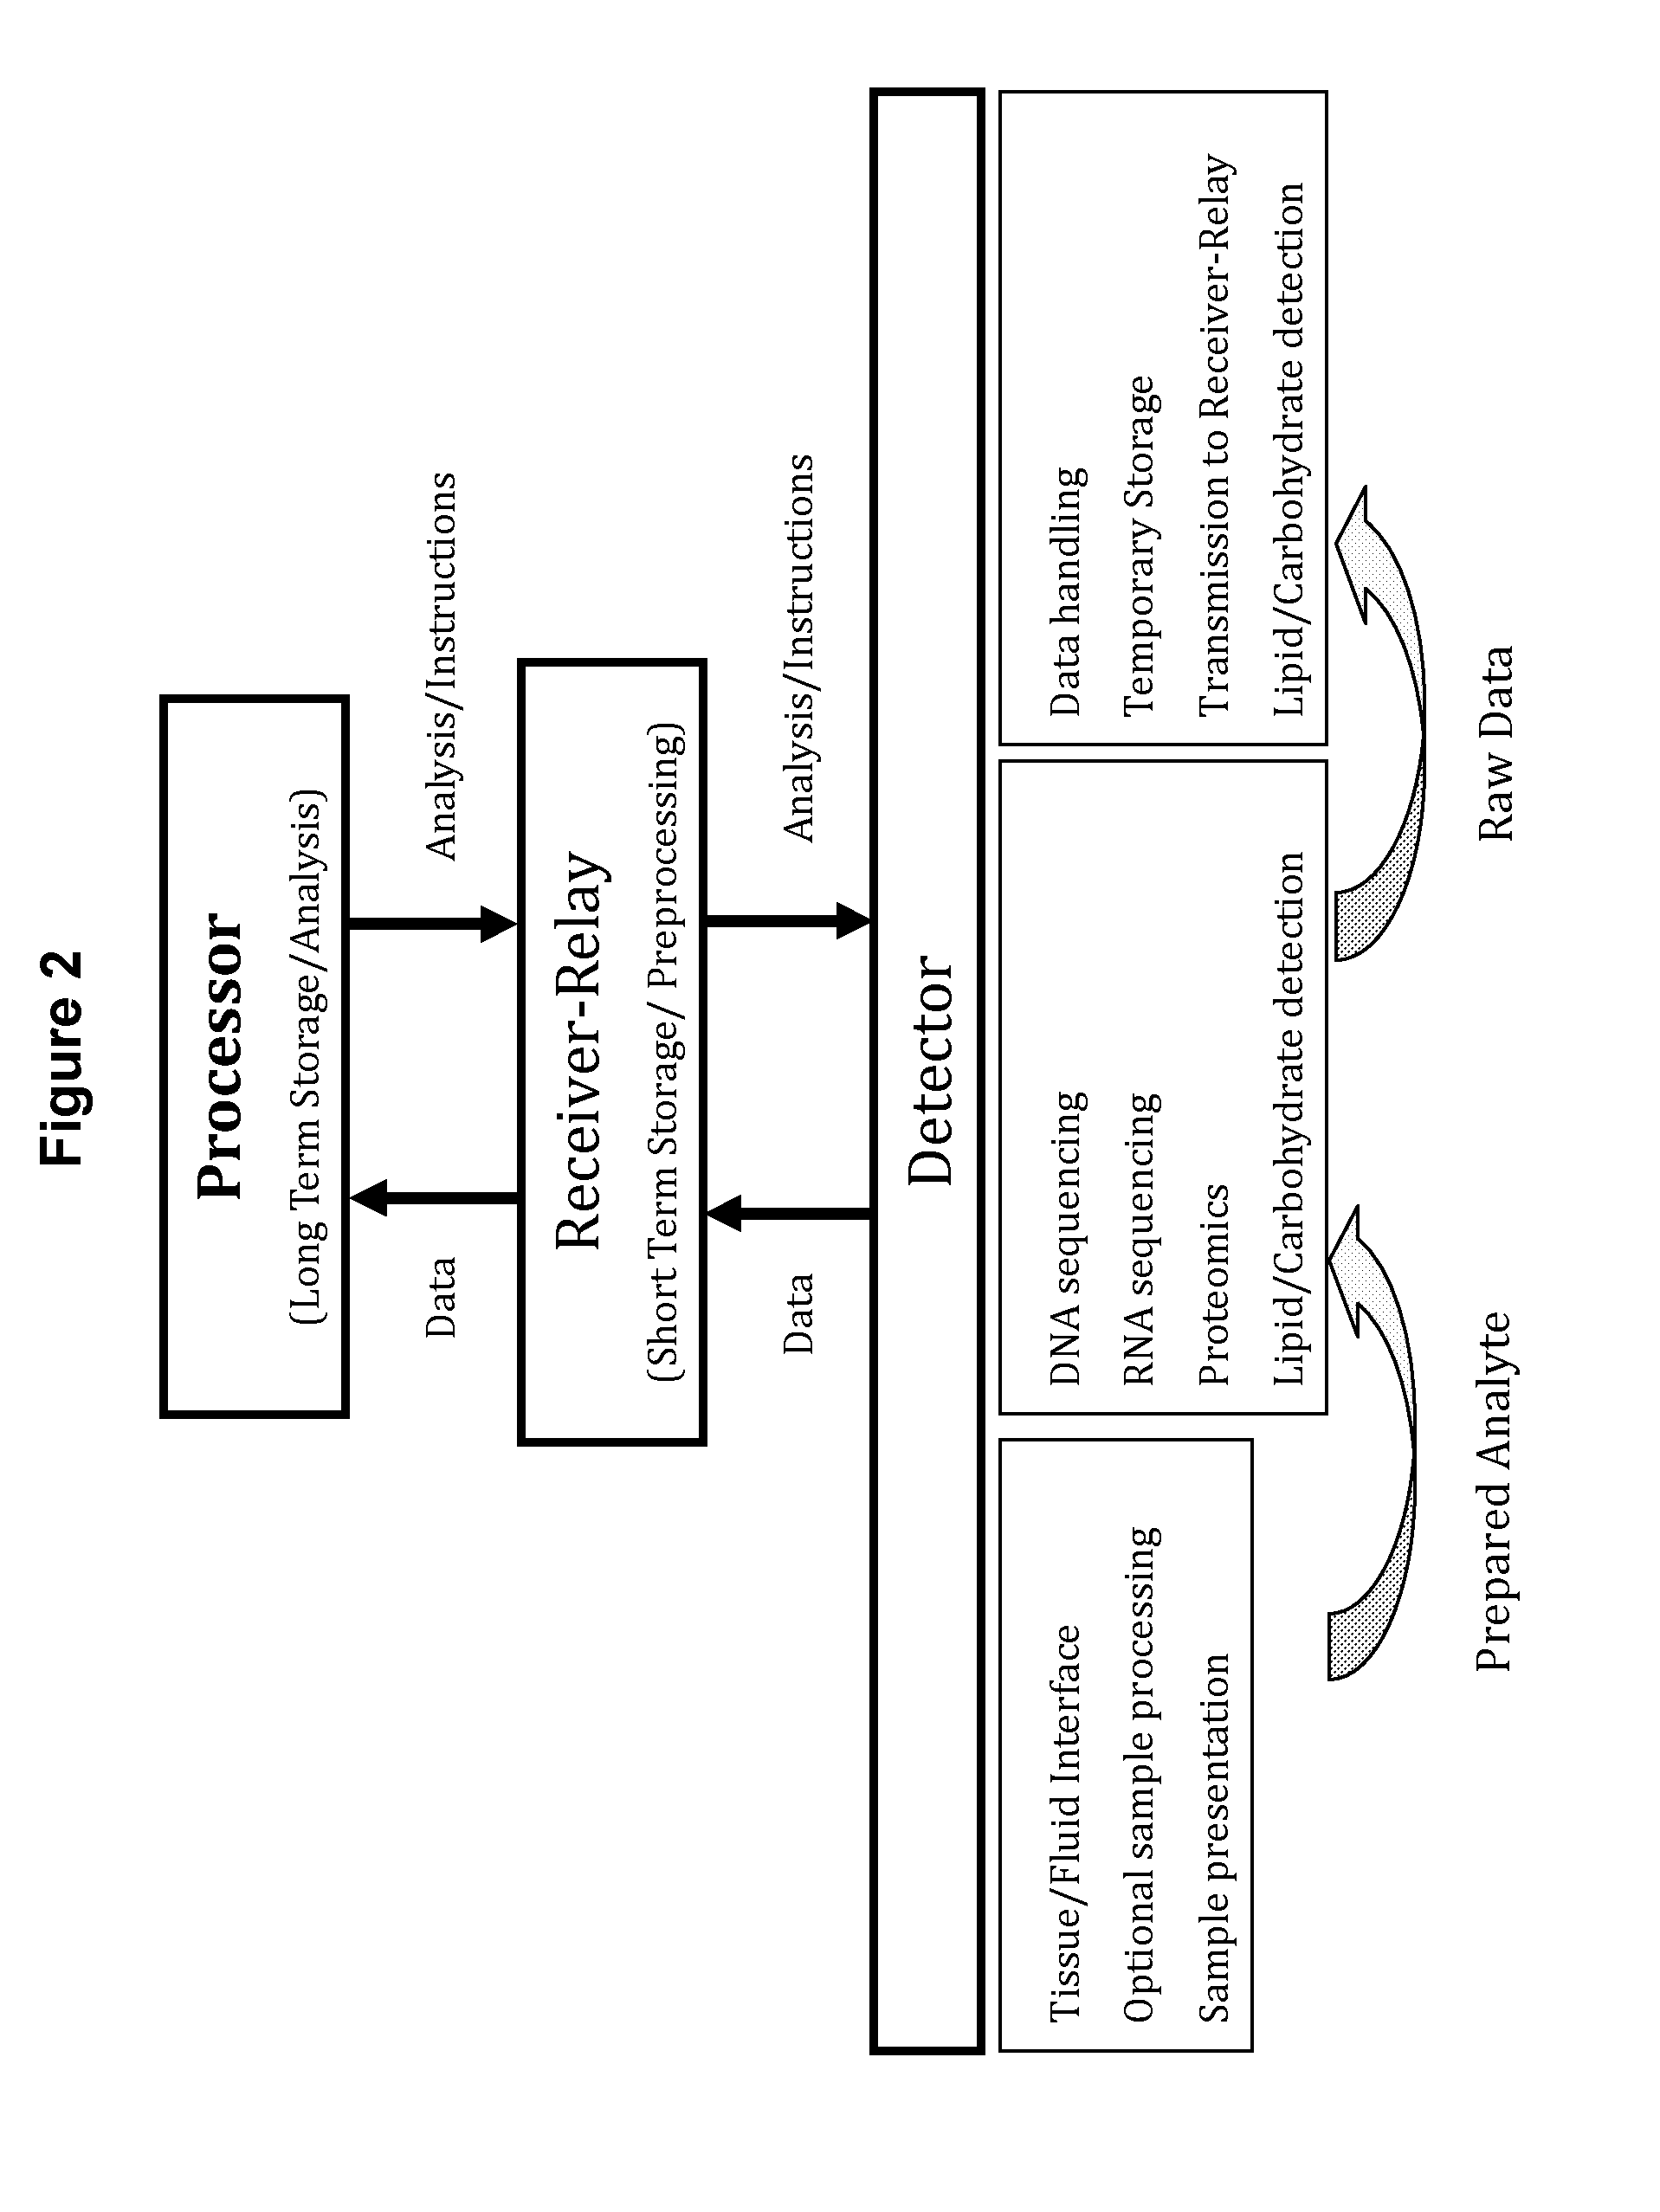 Systems and methods for early disease detection and real-time disease monitoring